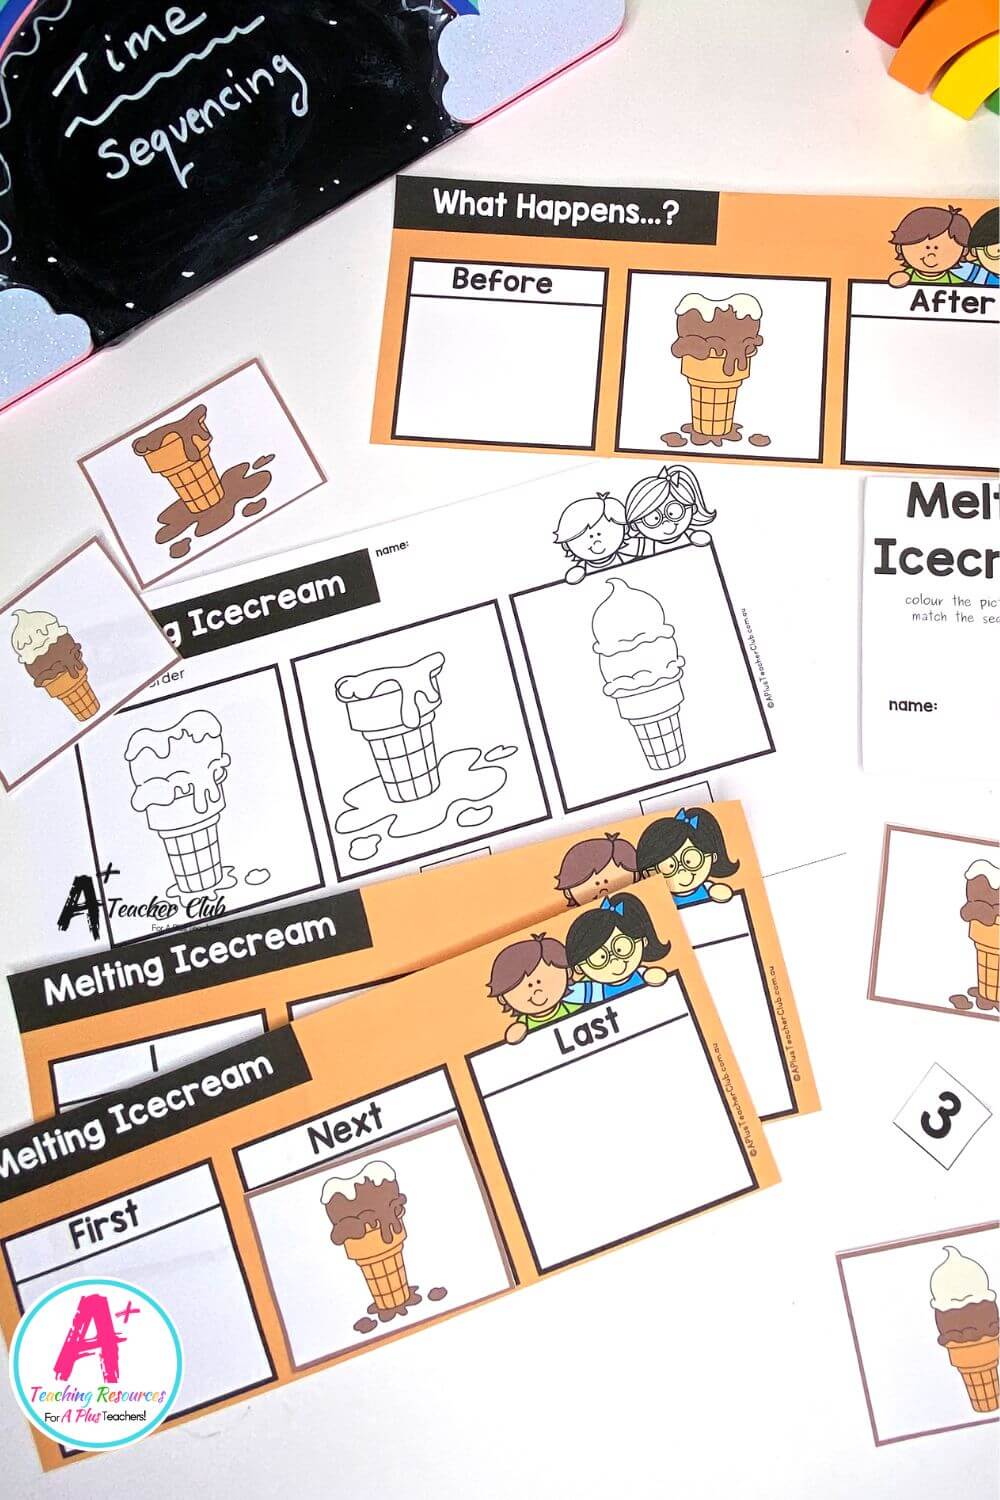 3-Step Sequencing Everyday Events - Melting Icecream Activities Pack